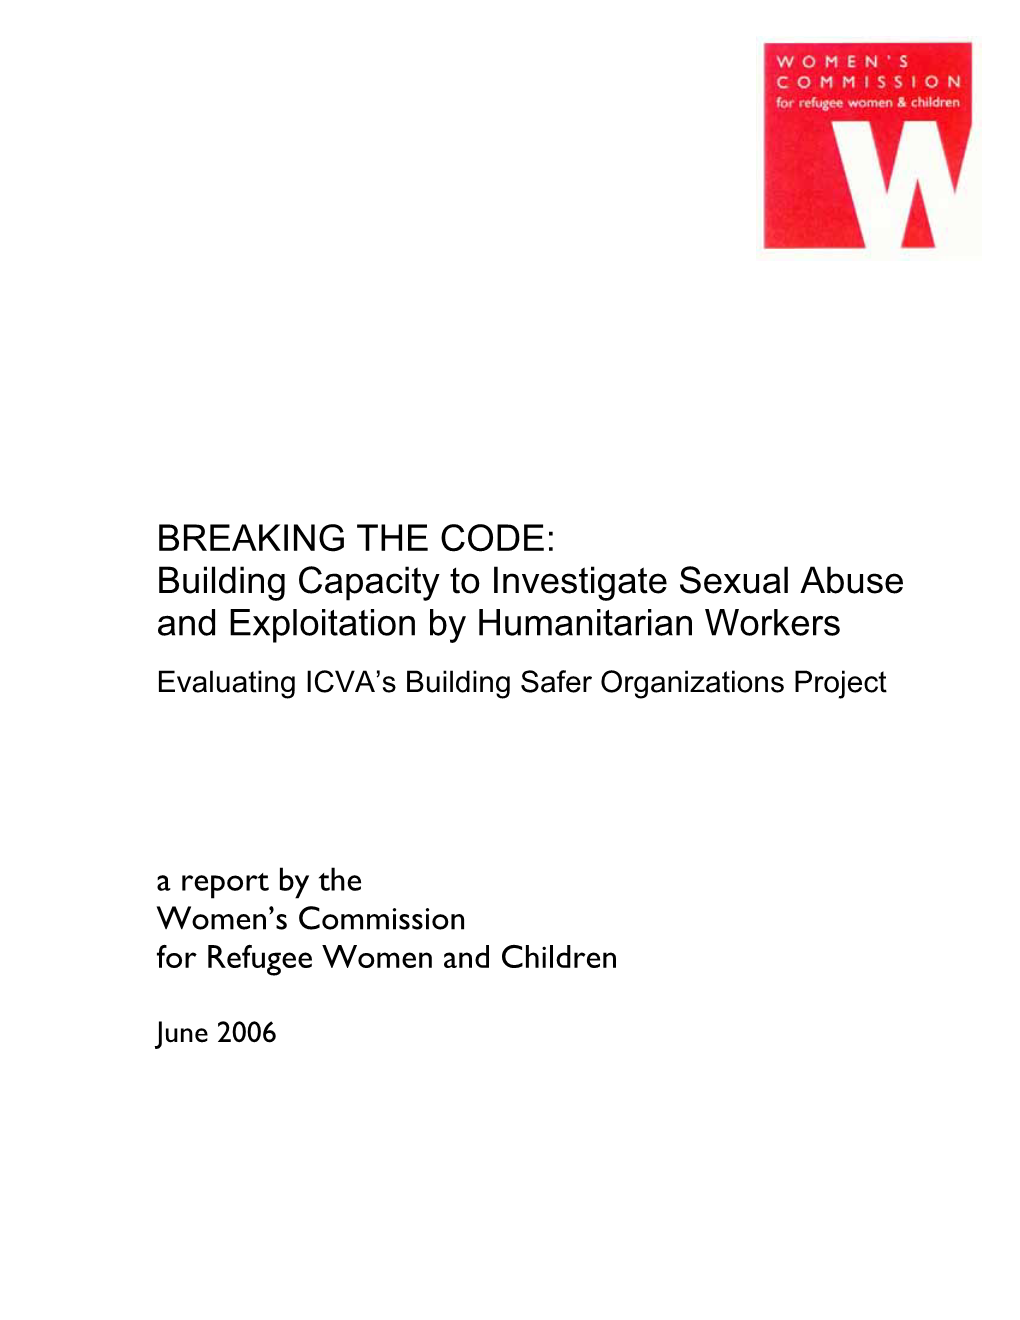 Building Capacity to Investigate Sexual Abuse and Exploitation by Humanitarian Workers Evaluating ICVA’S Building Safer Organizations Project